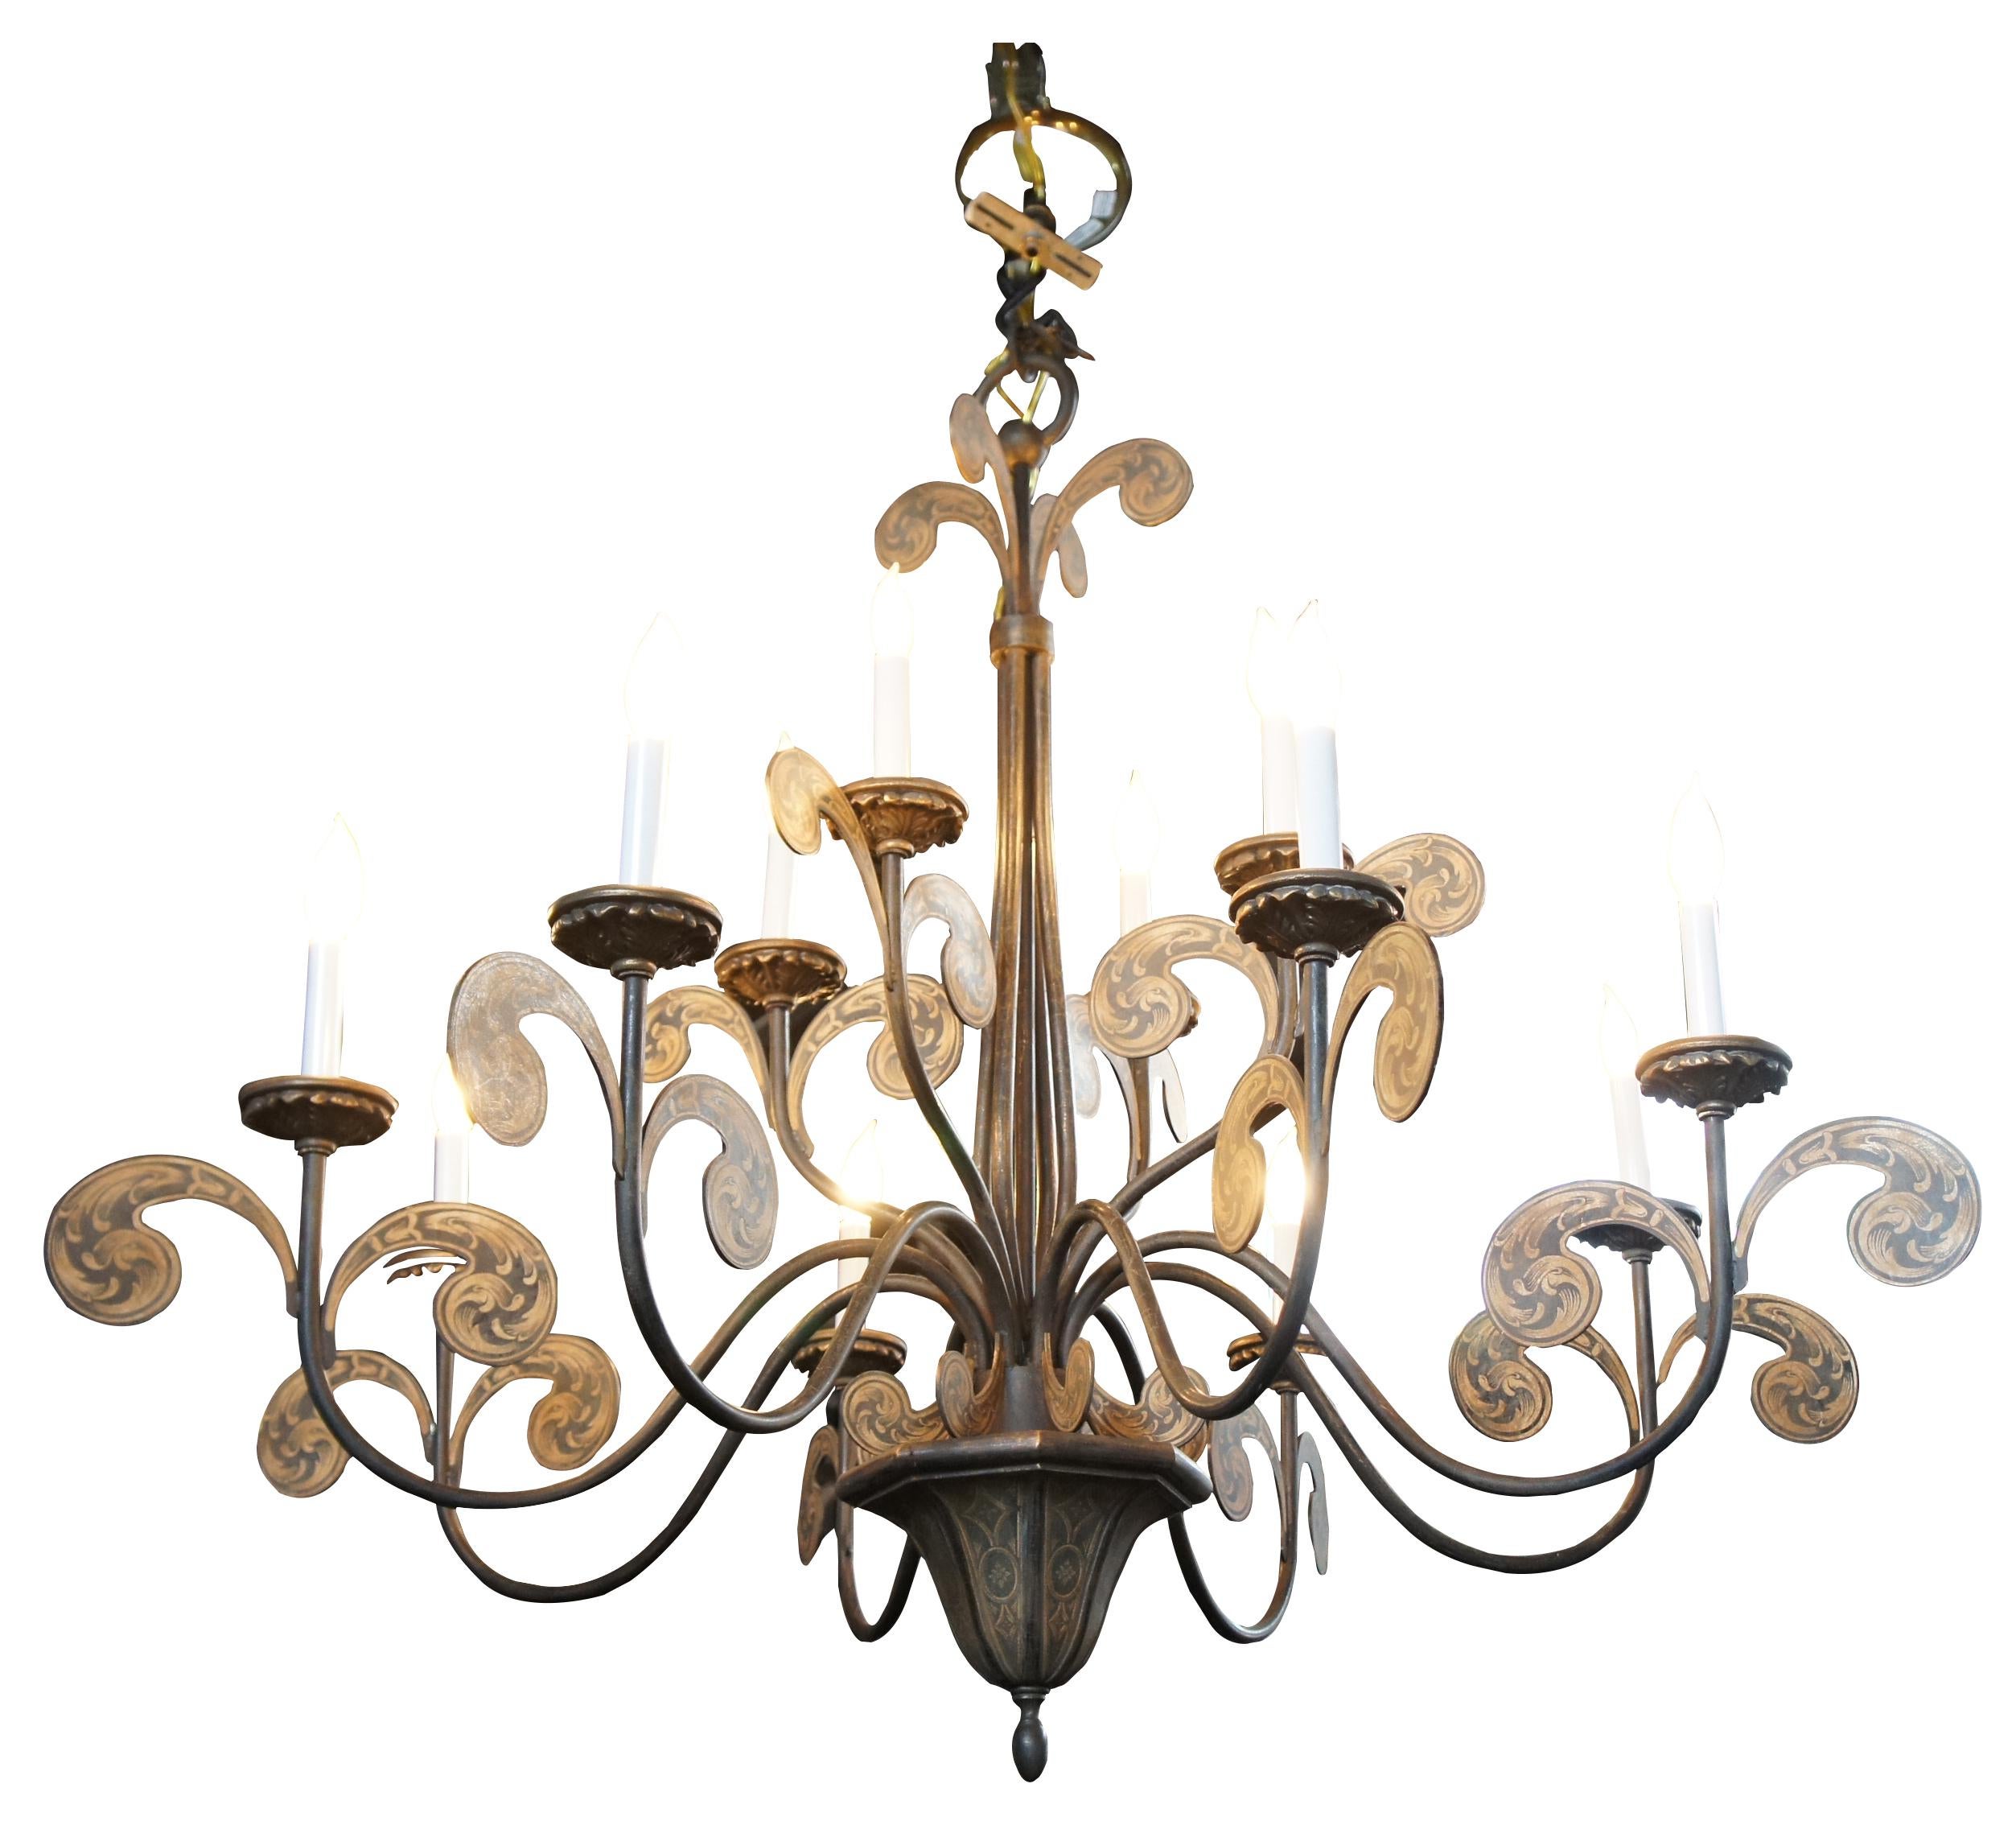 Two-tier chandelier with antiqued medieval acanthus leaf pattern in timeworn tea-stain and ebony.